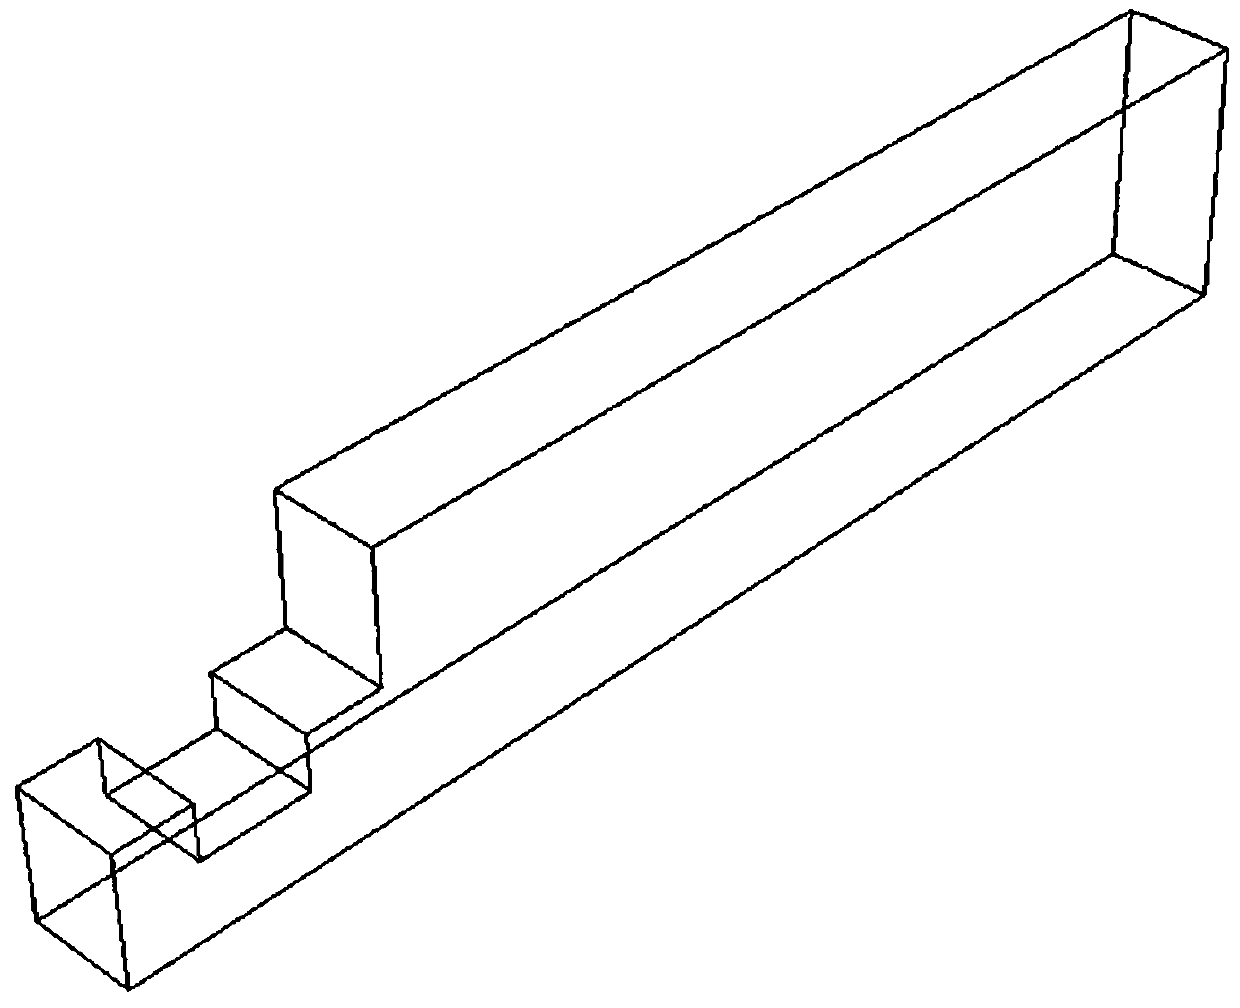 An assembled beam-column joint mortise and tenon connection structure